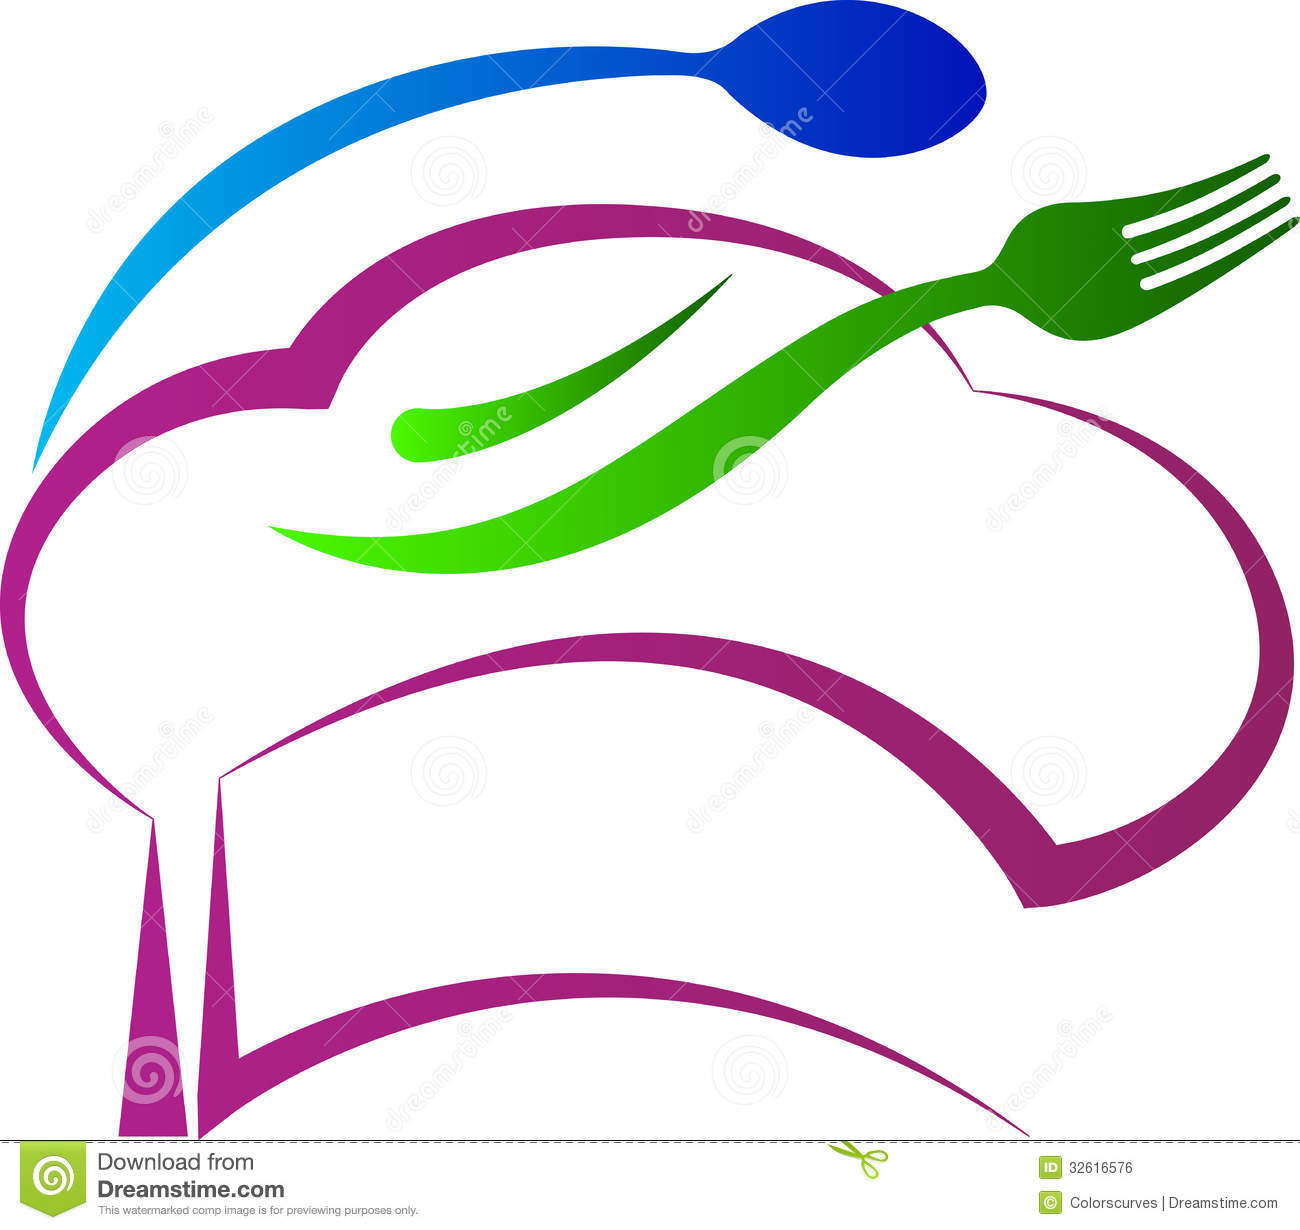 free chef hat clipart images - photo #27